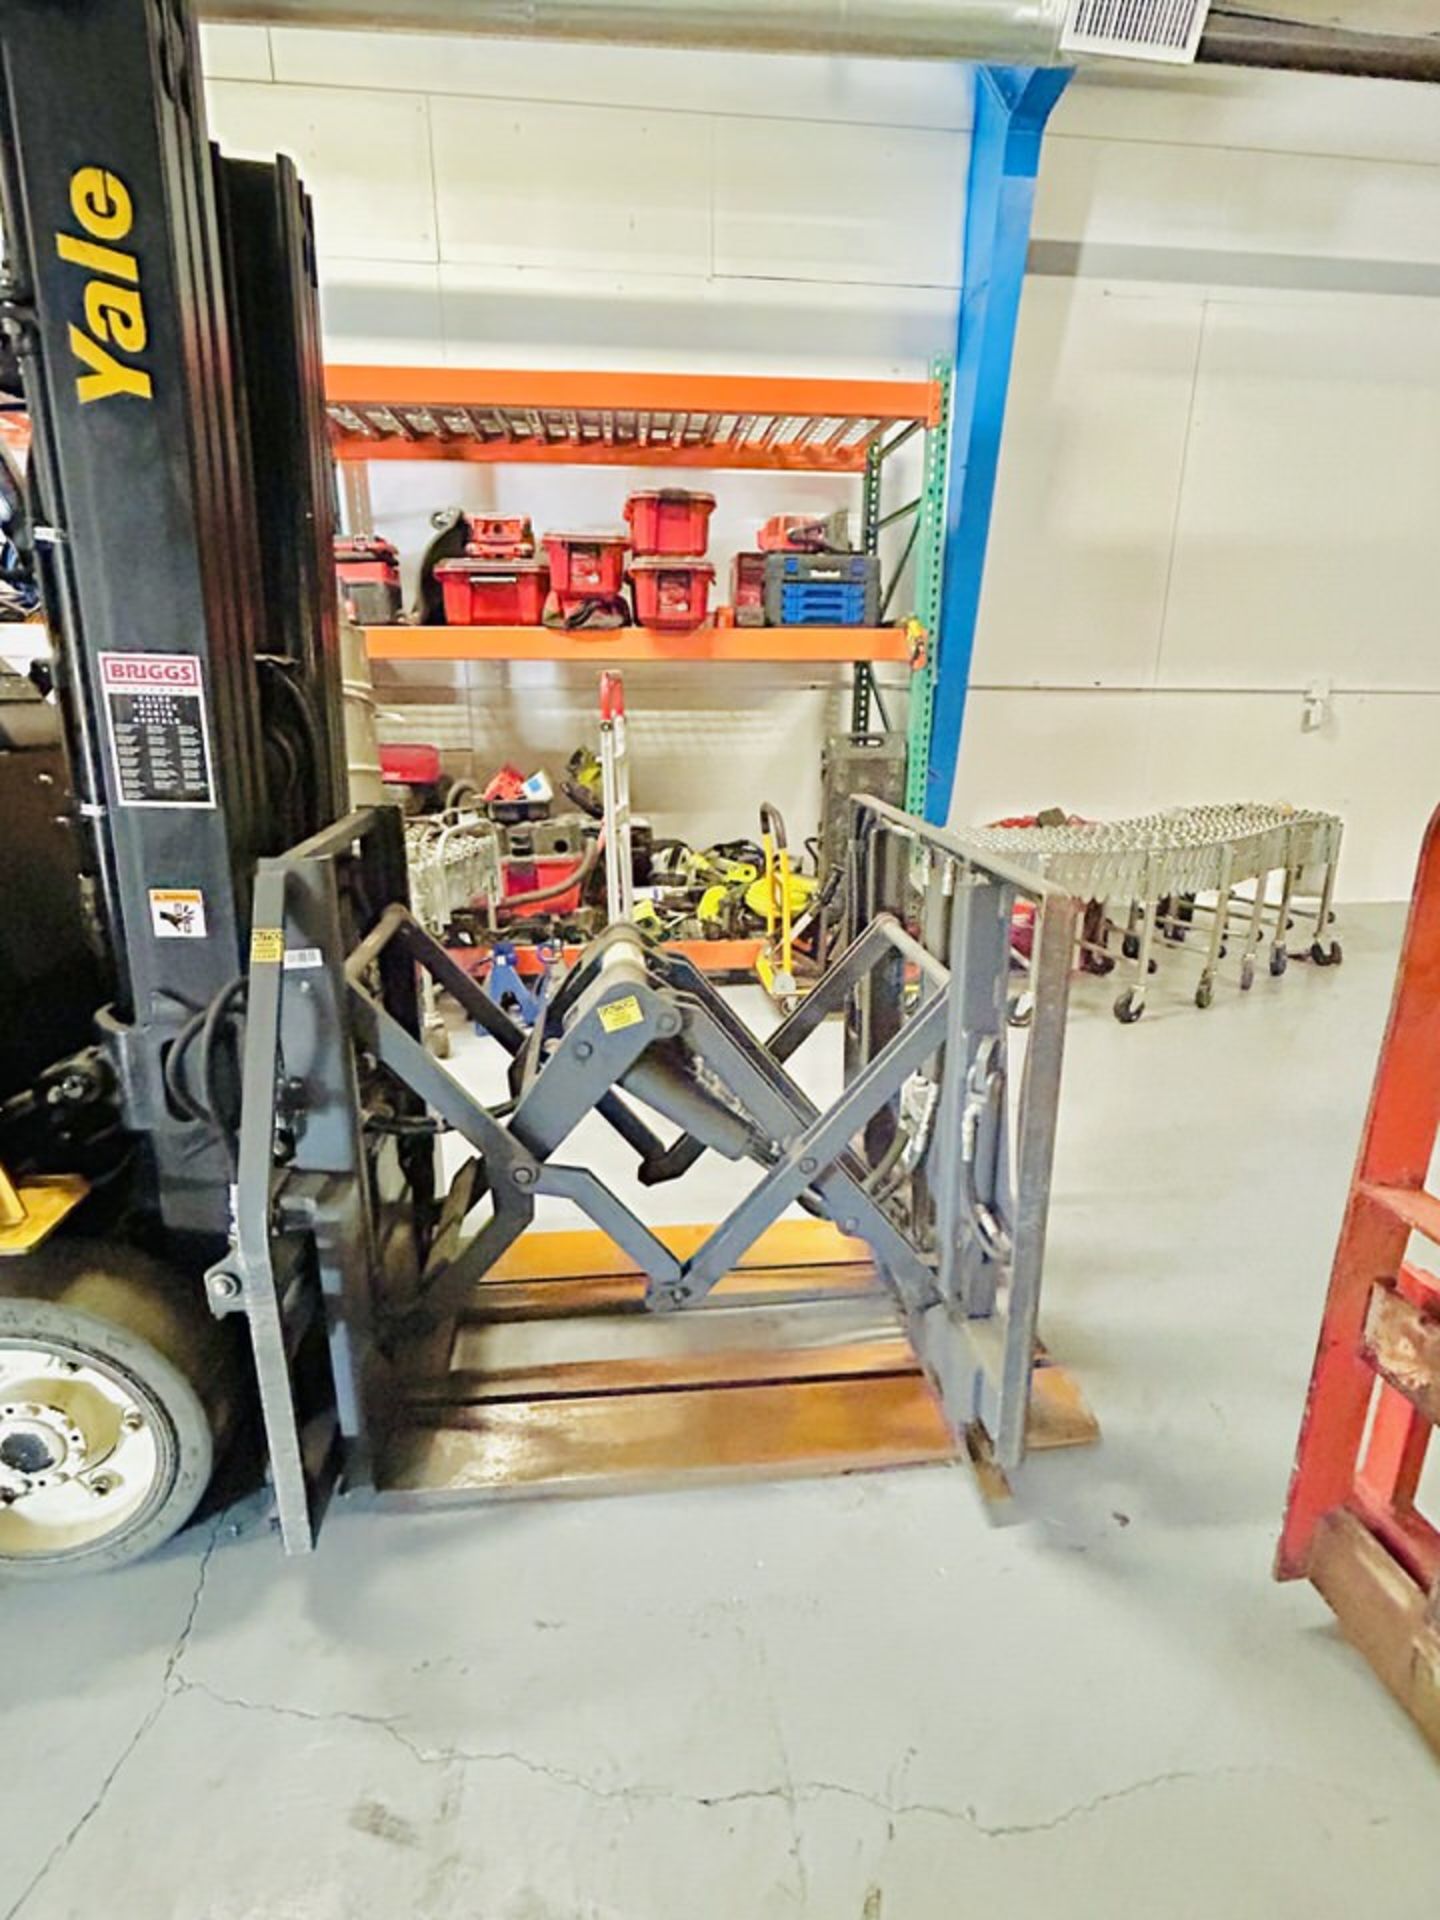 2013 Yale Electric 5,000 lbs Forklift, 3 Stage Mast, Sideshift, 42" Forks, Pull/Push Attchmnt - Image 5 of 5